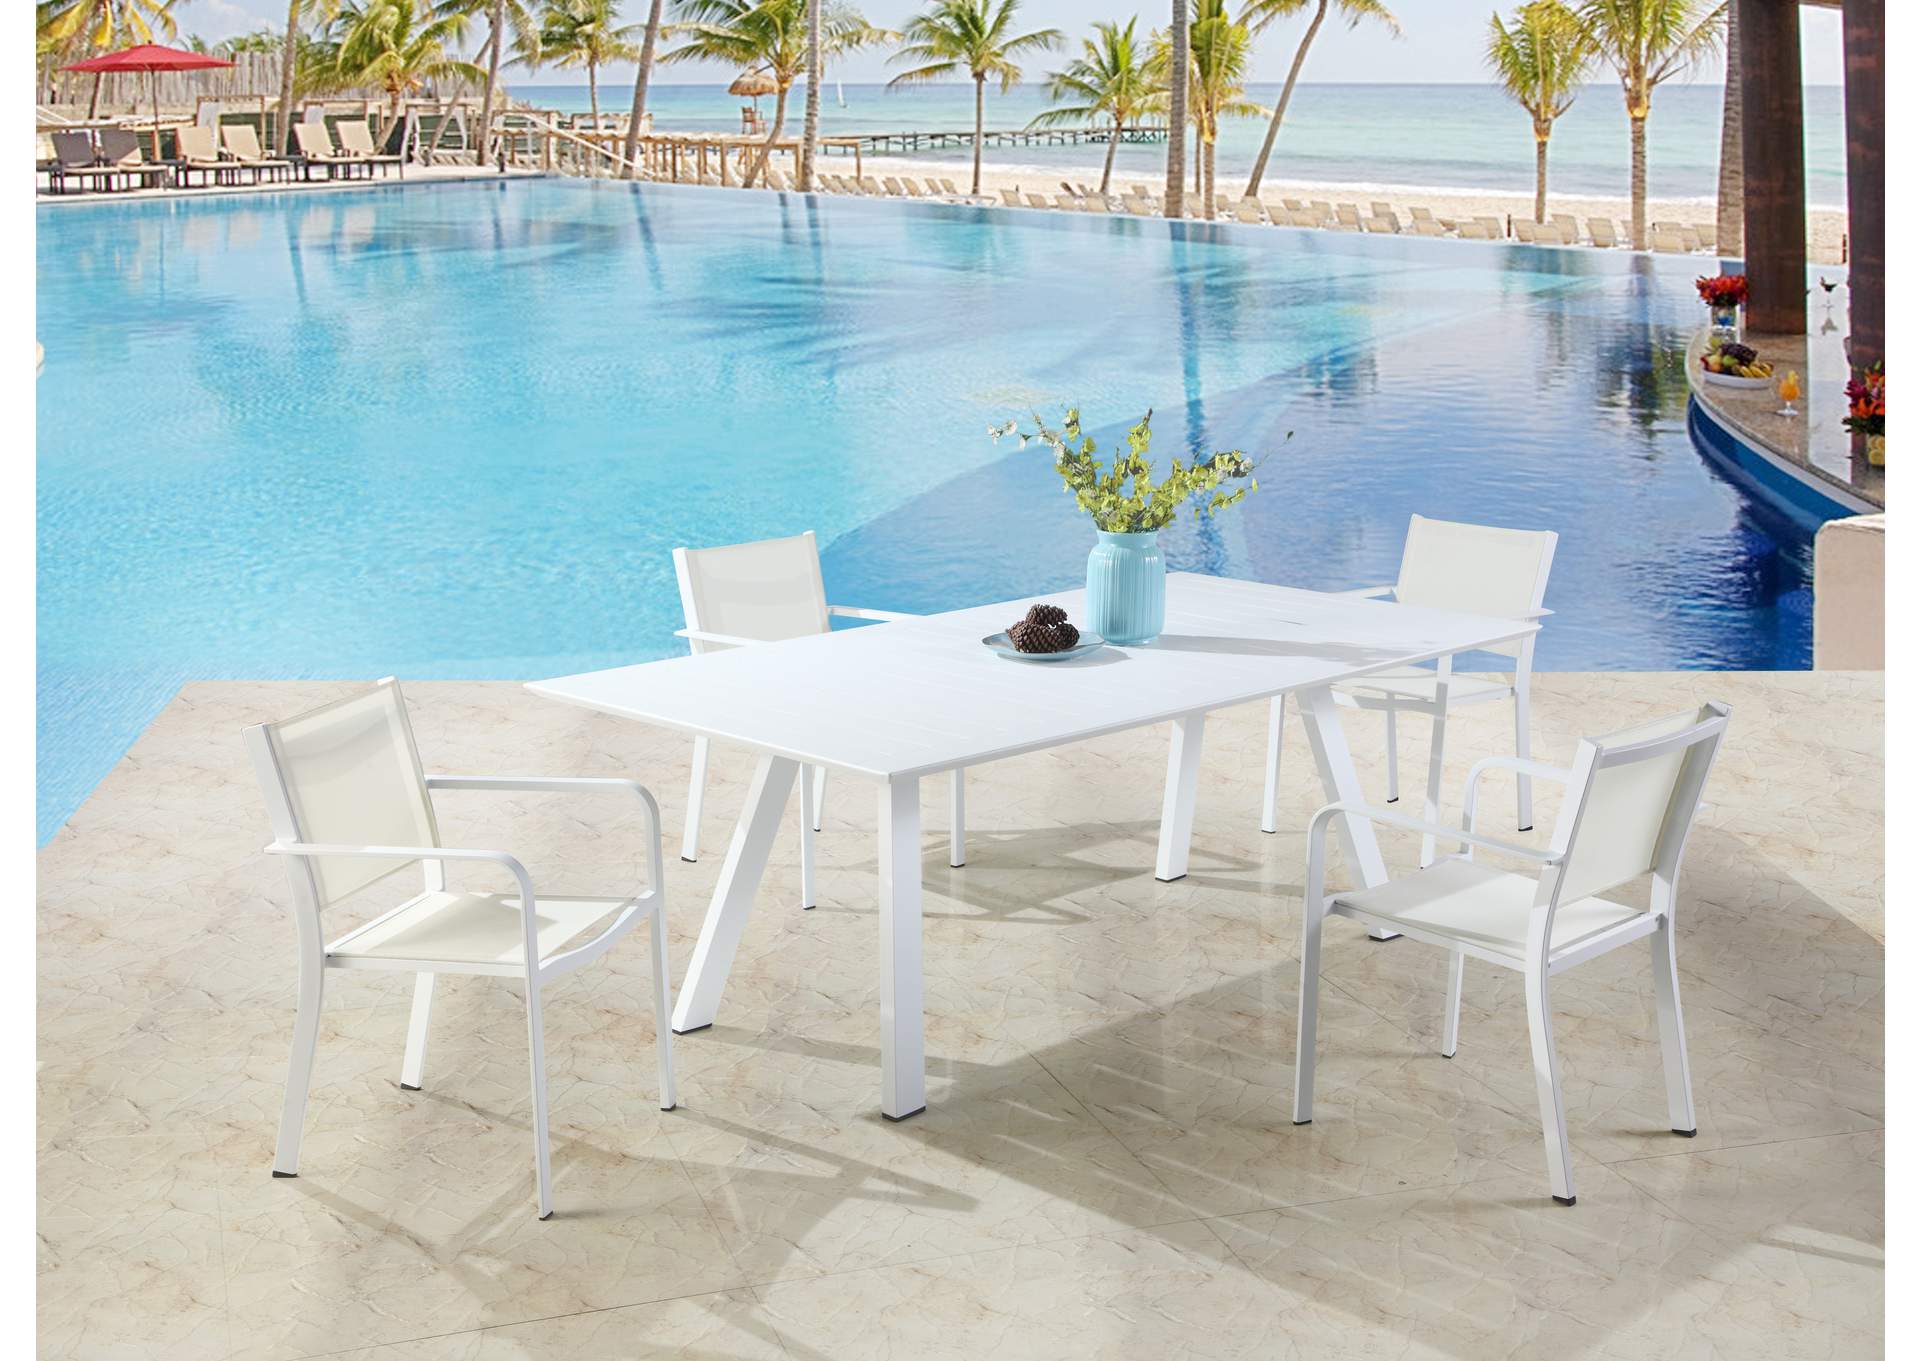 Malibu Matte White Outdoor UV Resistant Dining Set w/ Table & LB Chairs,Chintaly Imports